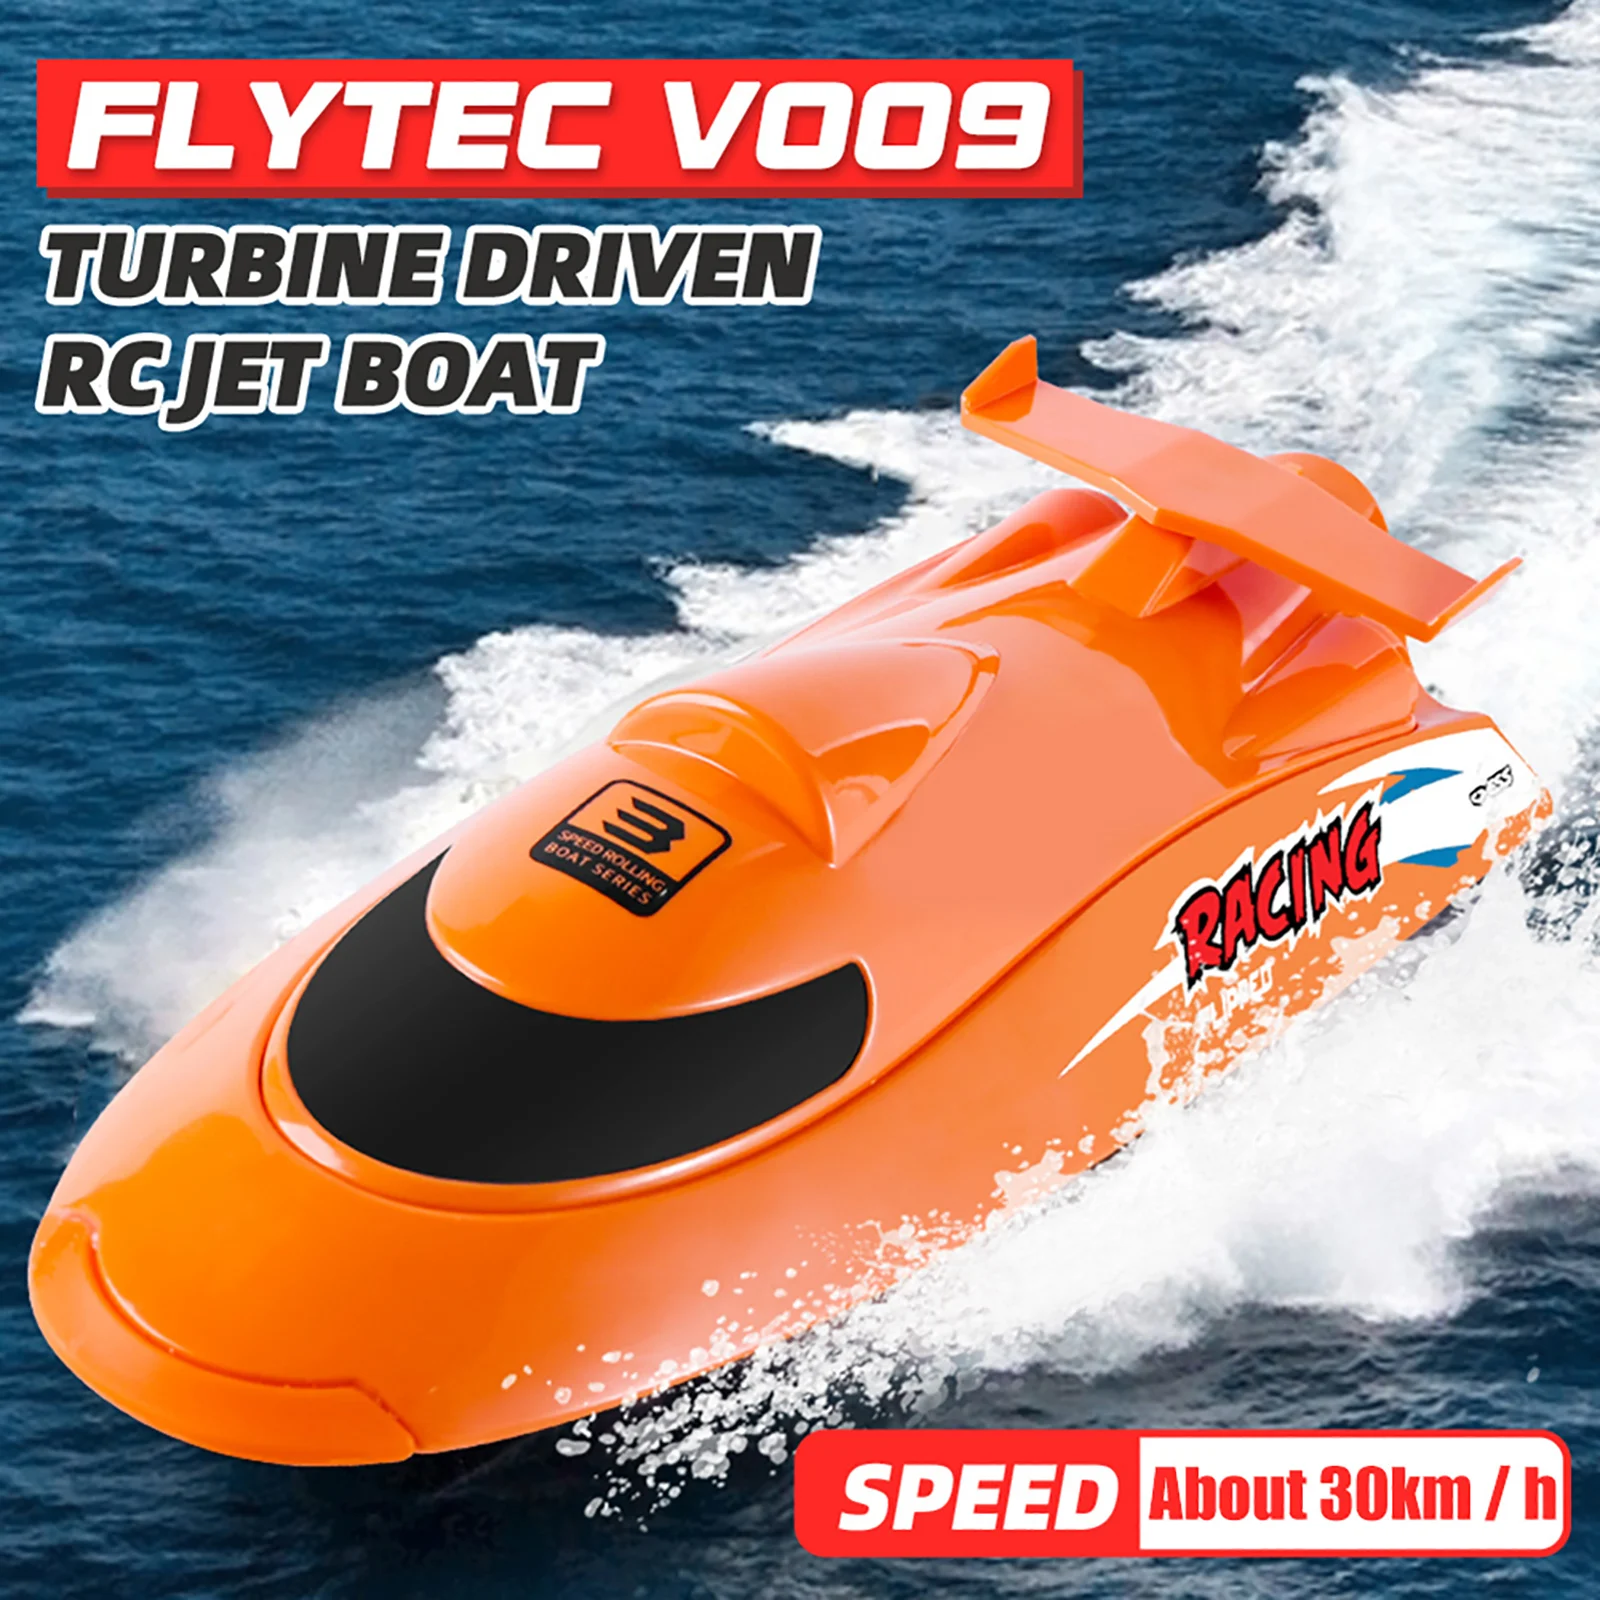 

RC Boat Flytec V009 Remote Control Boats 2.4G 30km/h Turbine Drive Remote Control Ship Waterproof 2.4GHz Electric RC Speed Boat